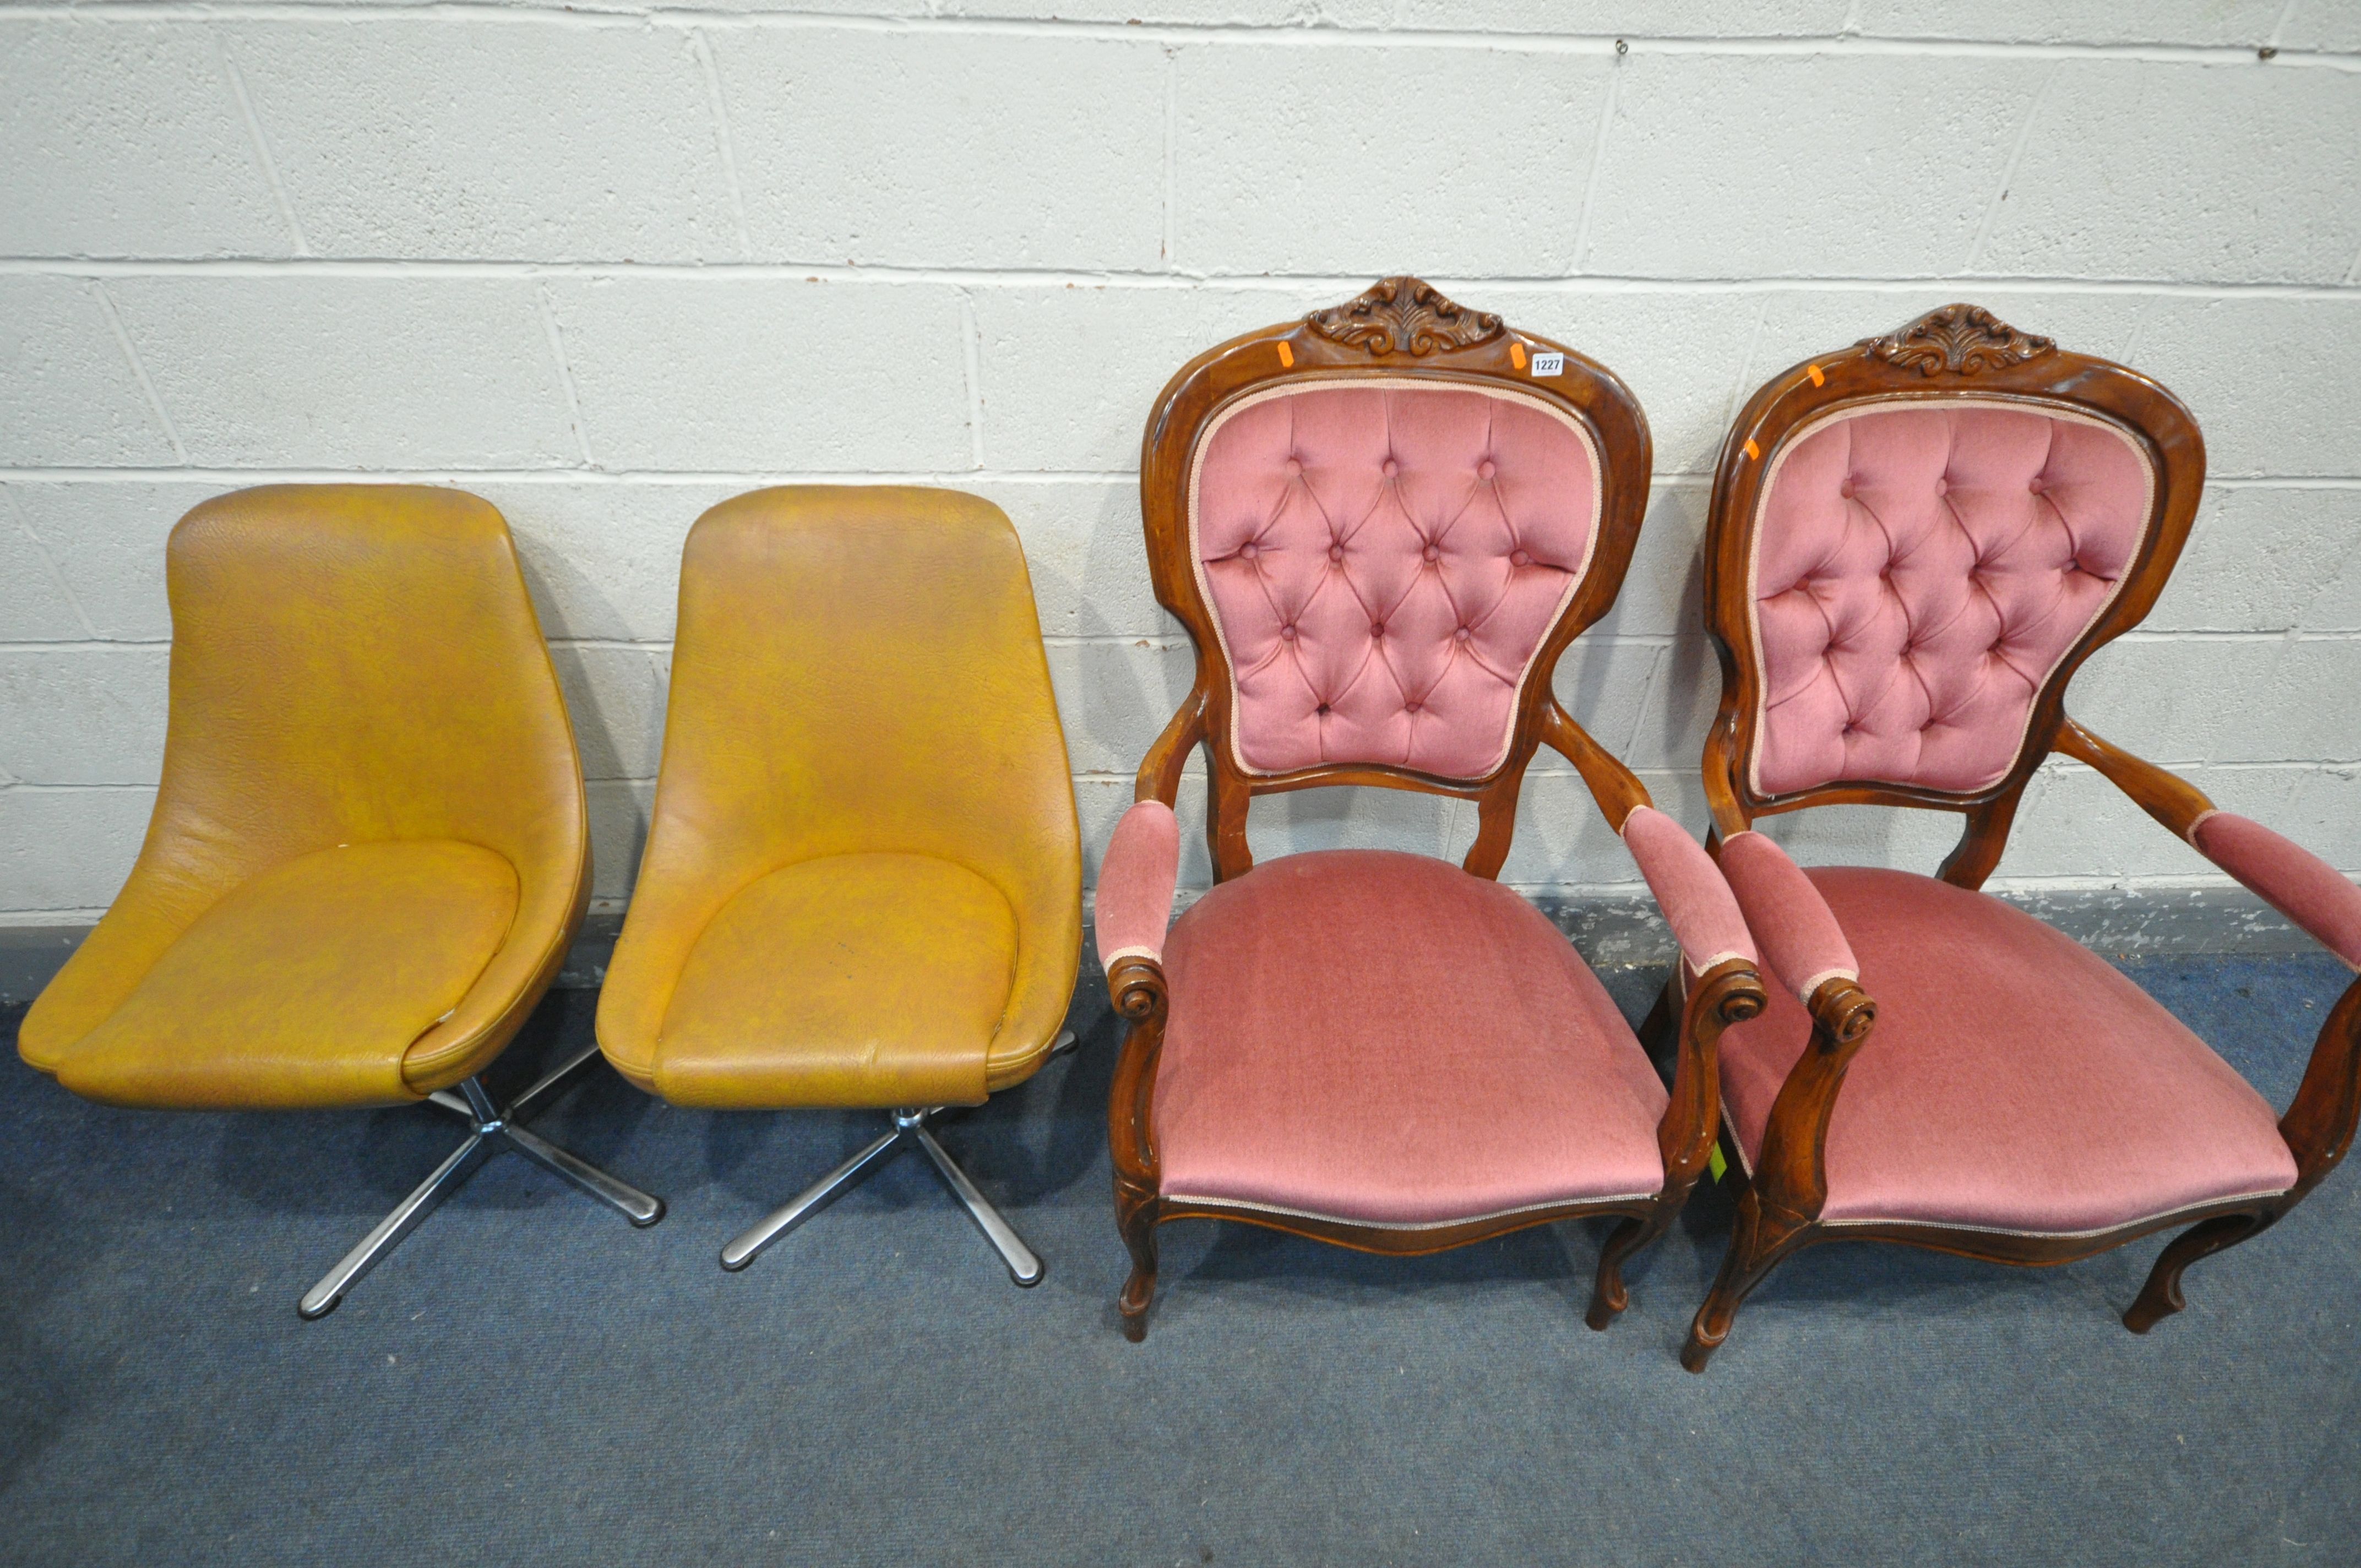 A PAIR OF ITALIAN STYLE MAHOGANY ARMCHAIRS, with open armrests, and pink upholstery, along with a